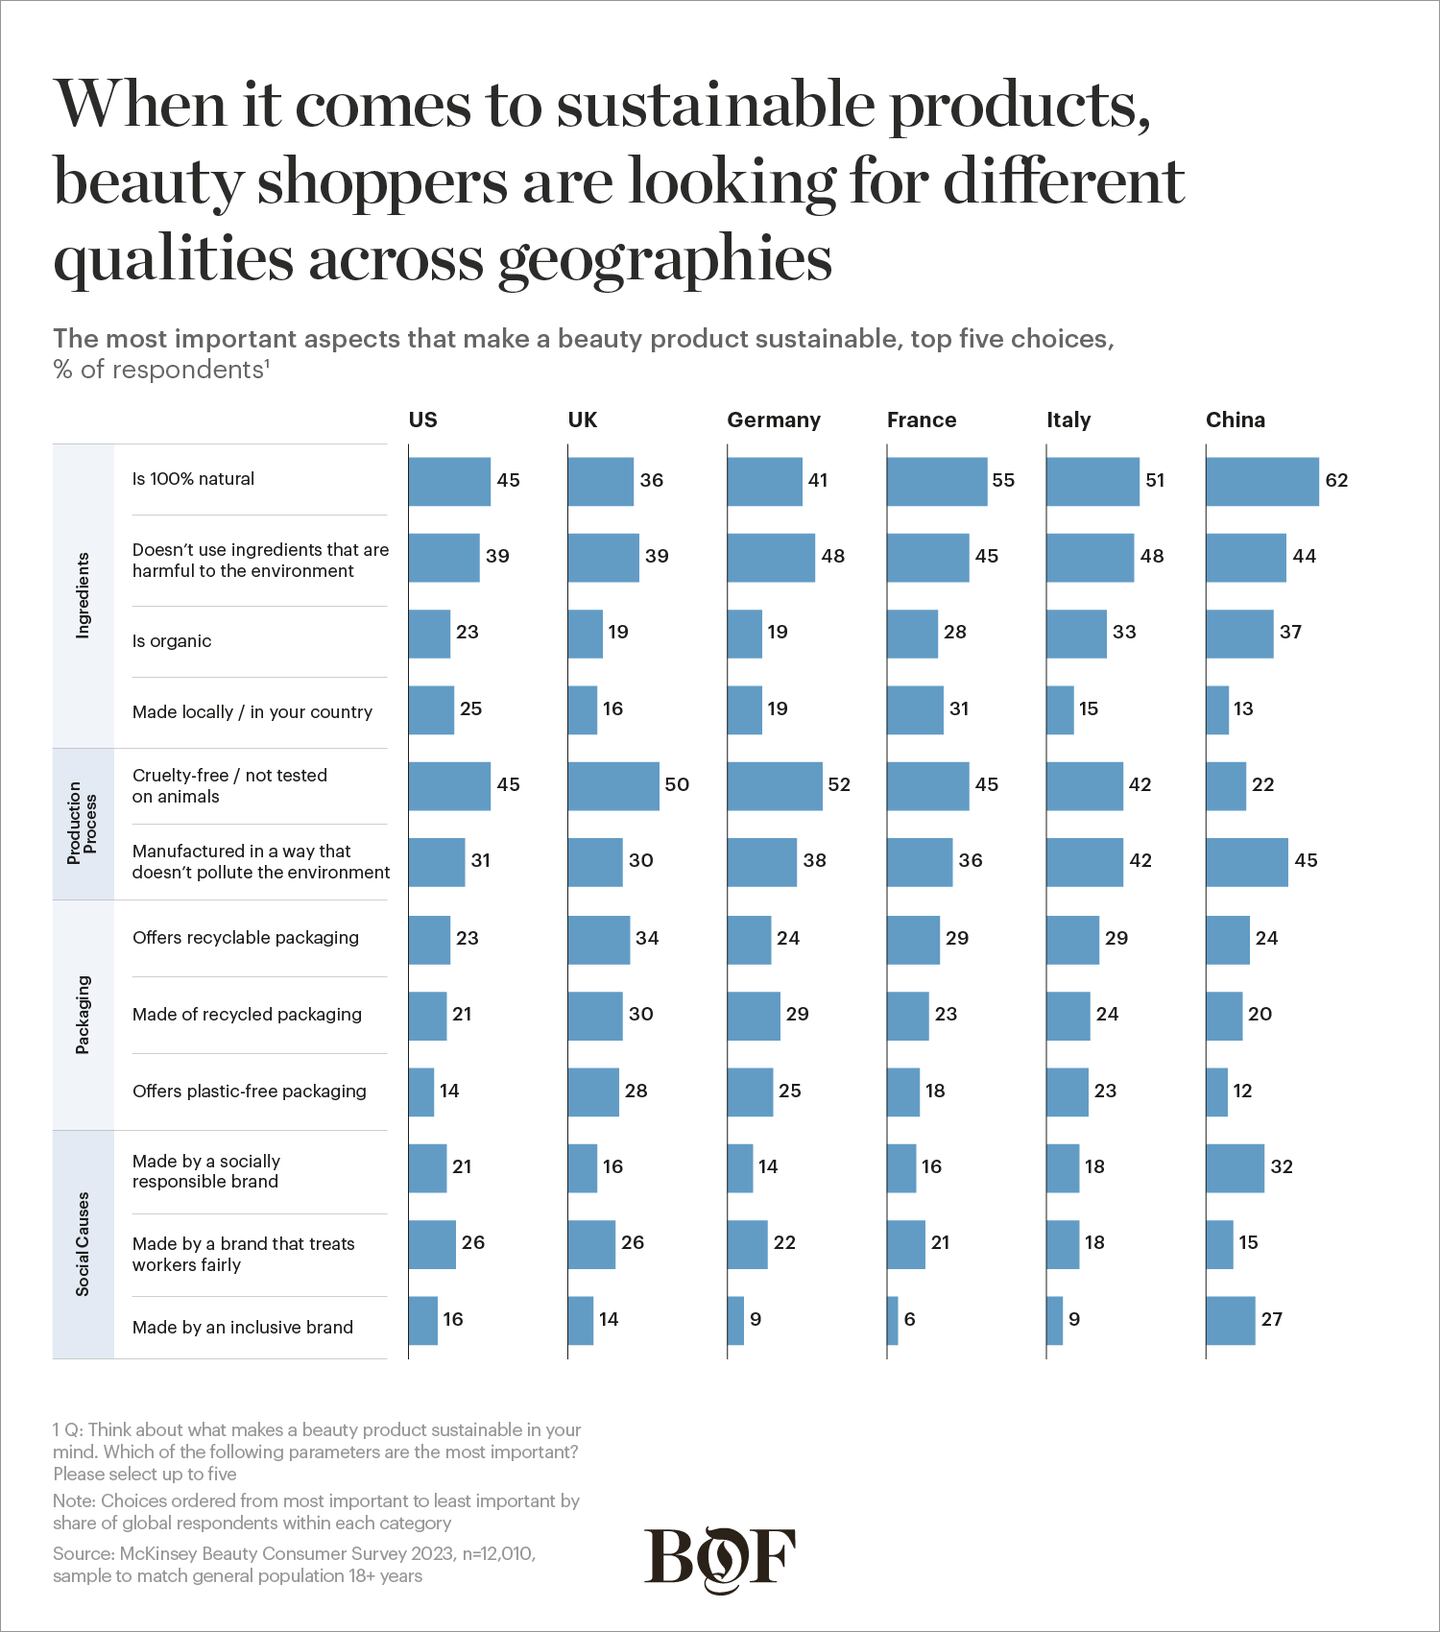 When it comes to sustainable products, beauty shoppers are
looking for different qualities across geographies